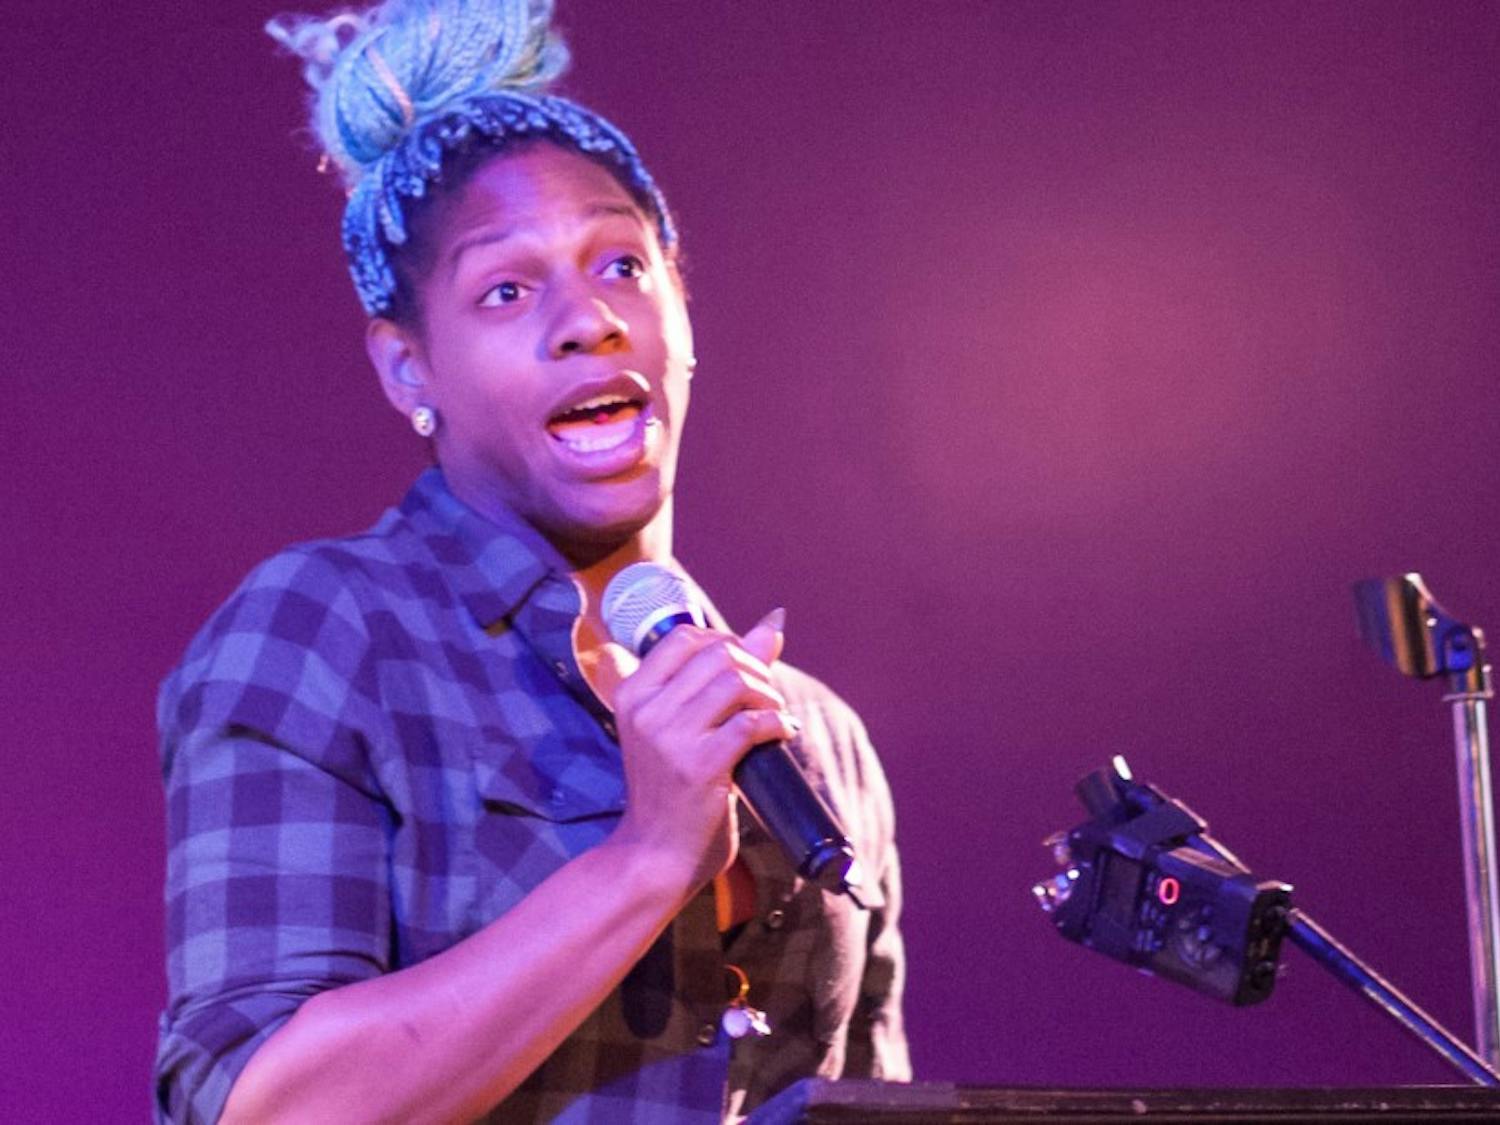 CeCe McDonald, pictured in San Francisco in 2015, visited Durham last Sunday for "Evening Tea with CeCe McDonald," which was sponsored by the LGBTQ Center of Durham and the Center for Sexual and Gender Diversity at Duke.